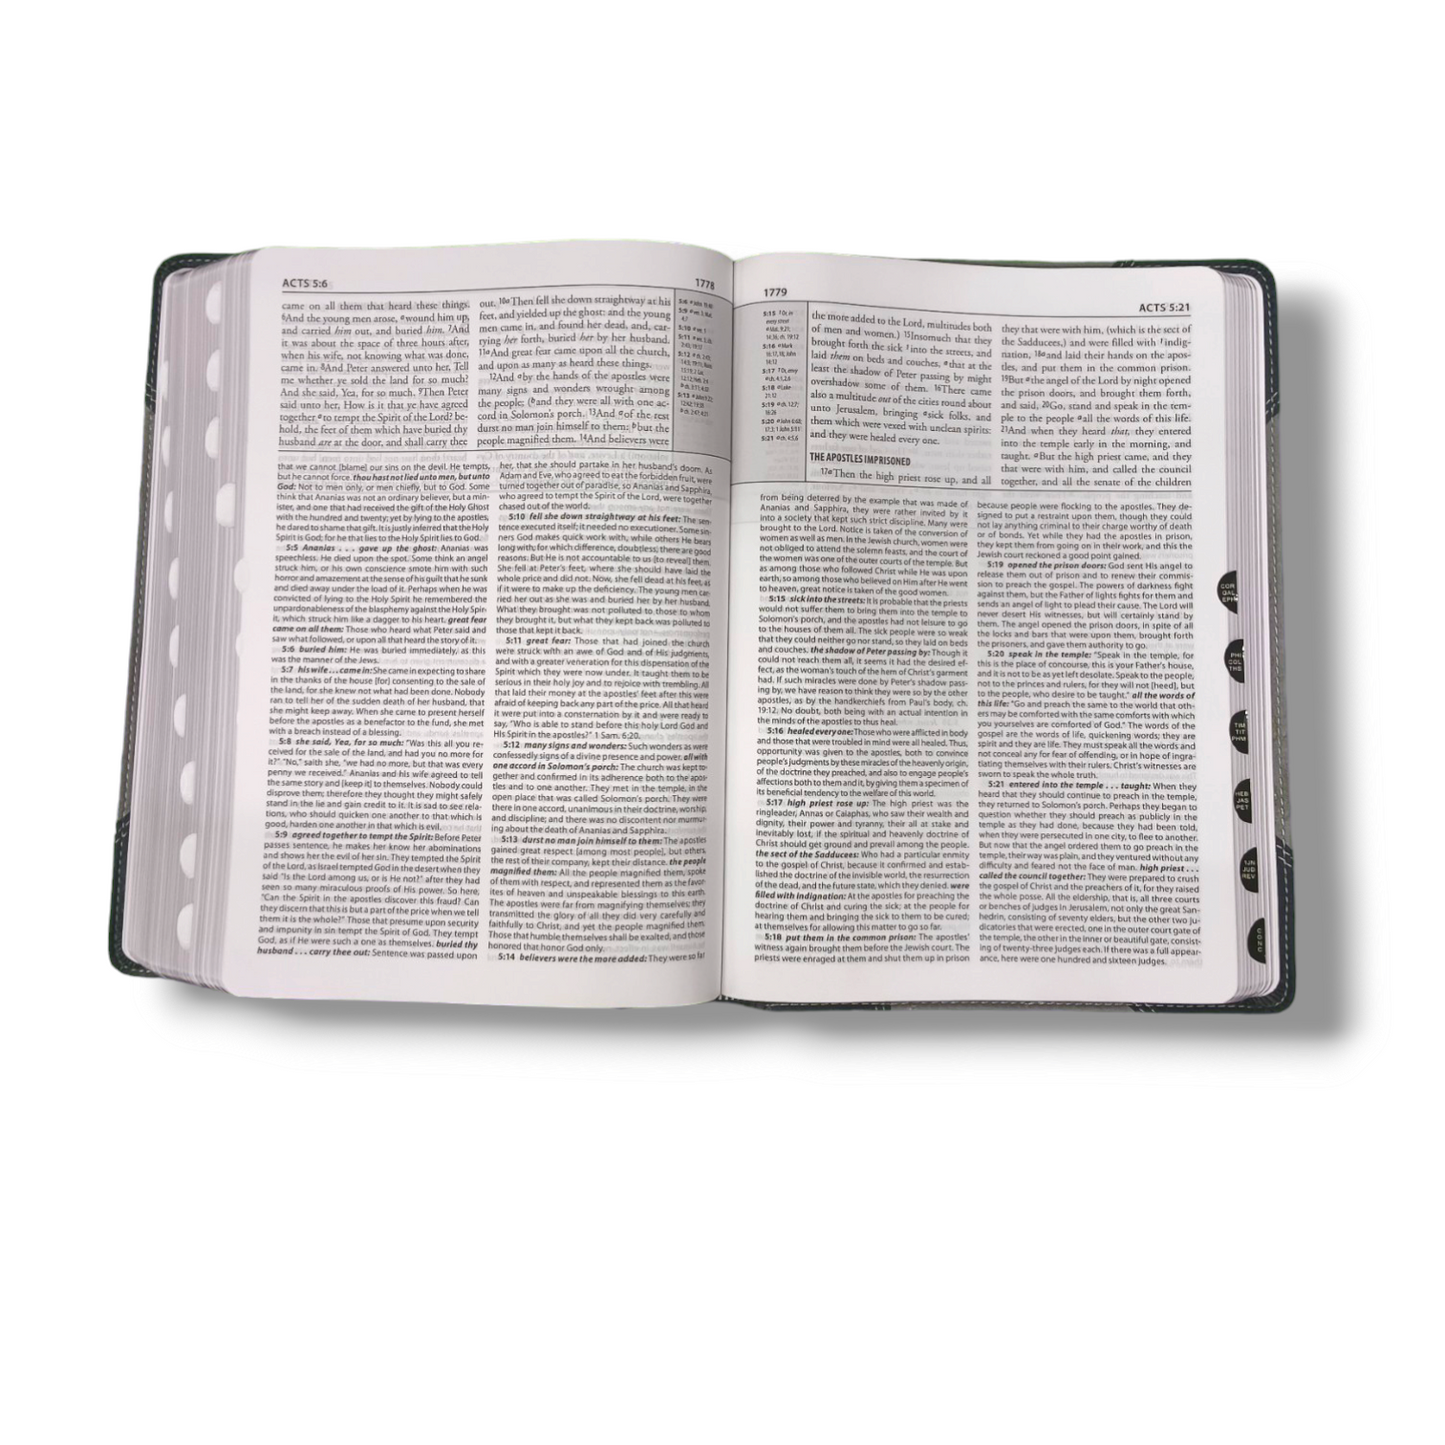 The Matthew Henry Study Bible | Hard Bound Edition | With Thumb Index | New Edition